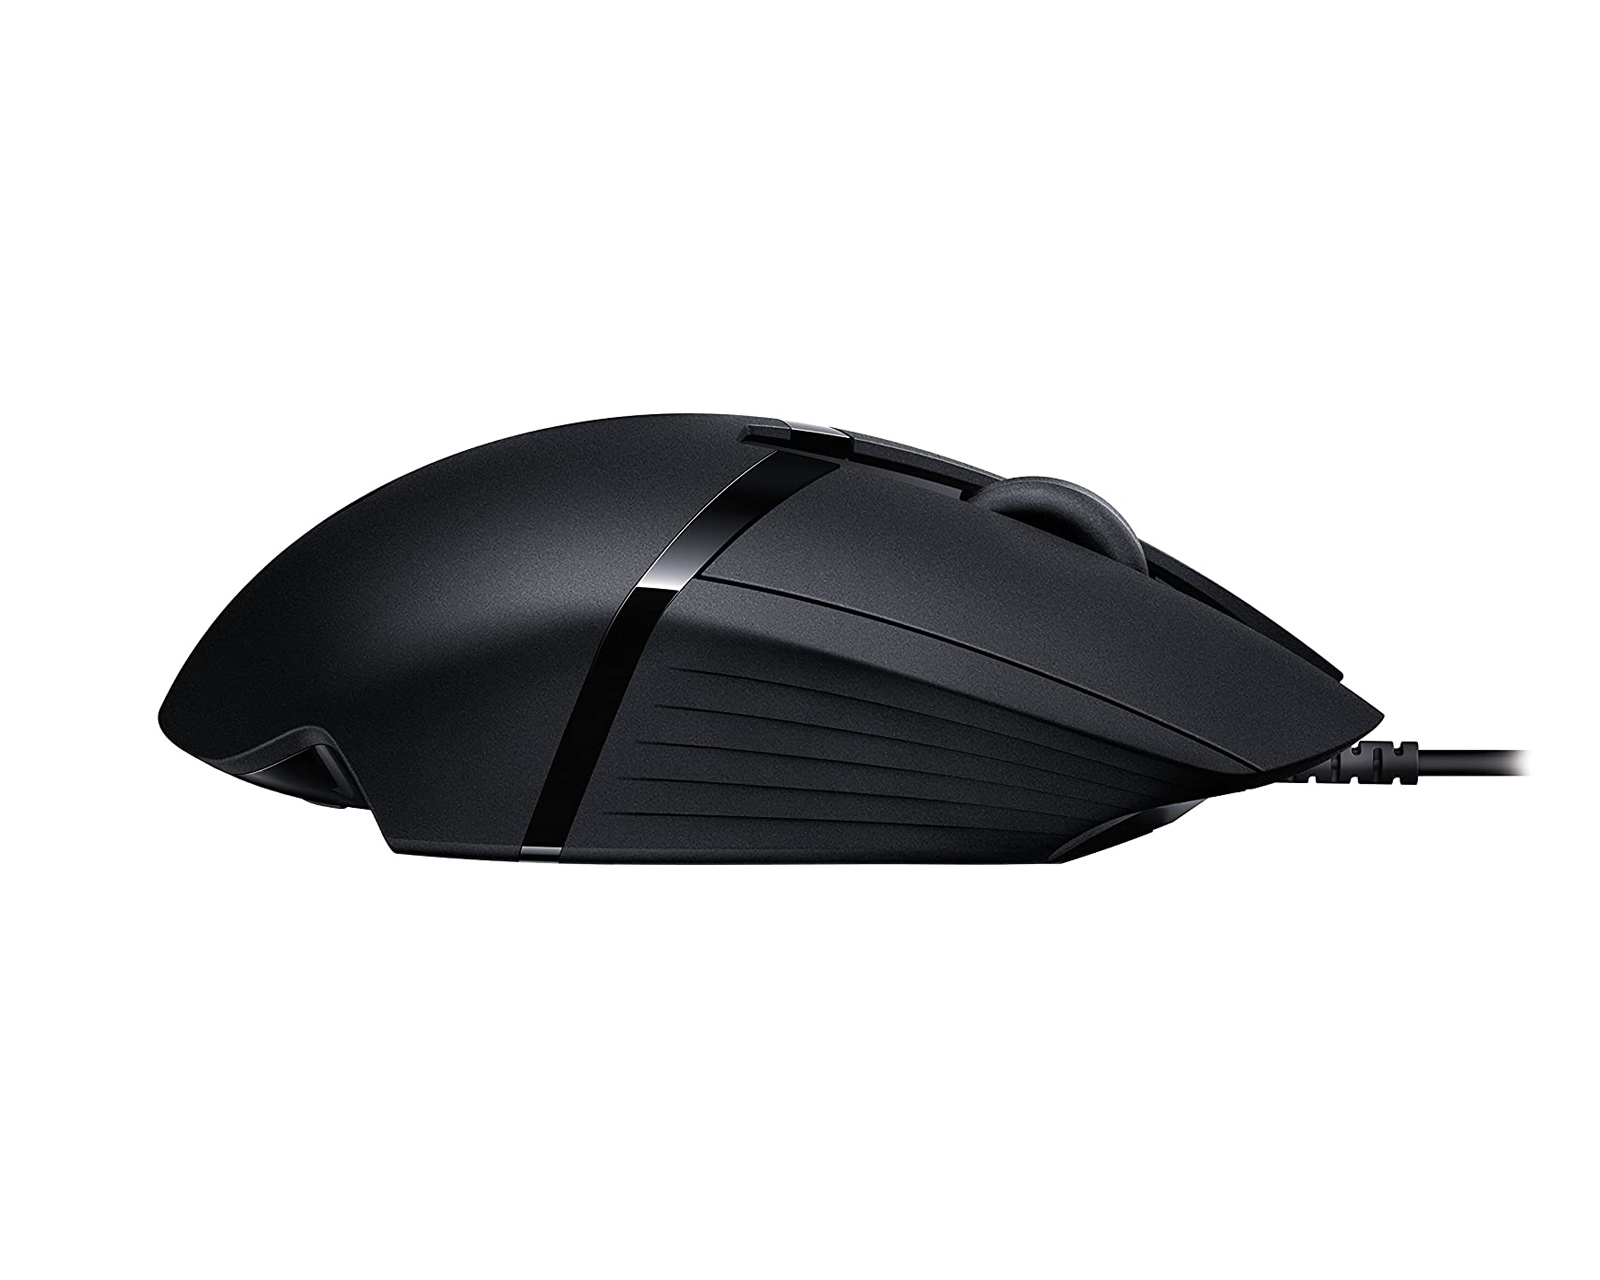 G402 Hyperion Fury FPS Gaming Mouse - Black - us.MaxGaming.com